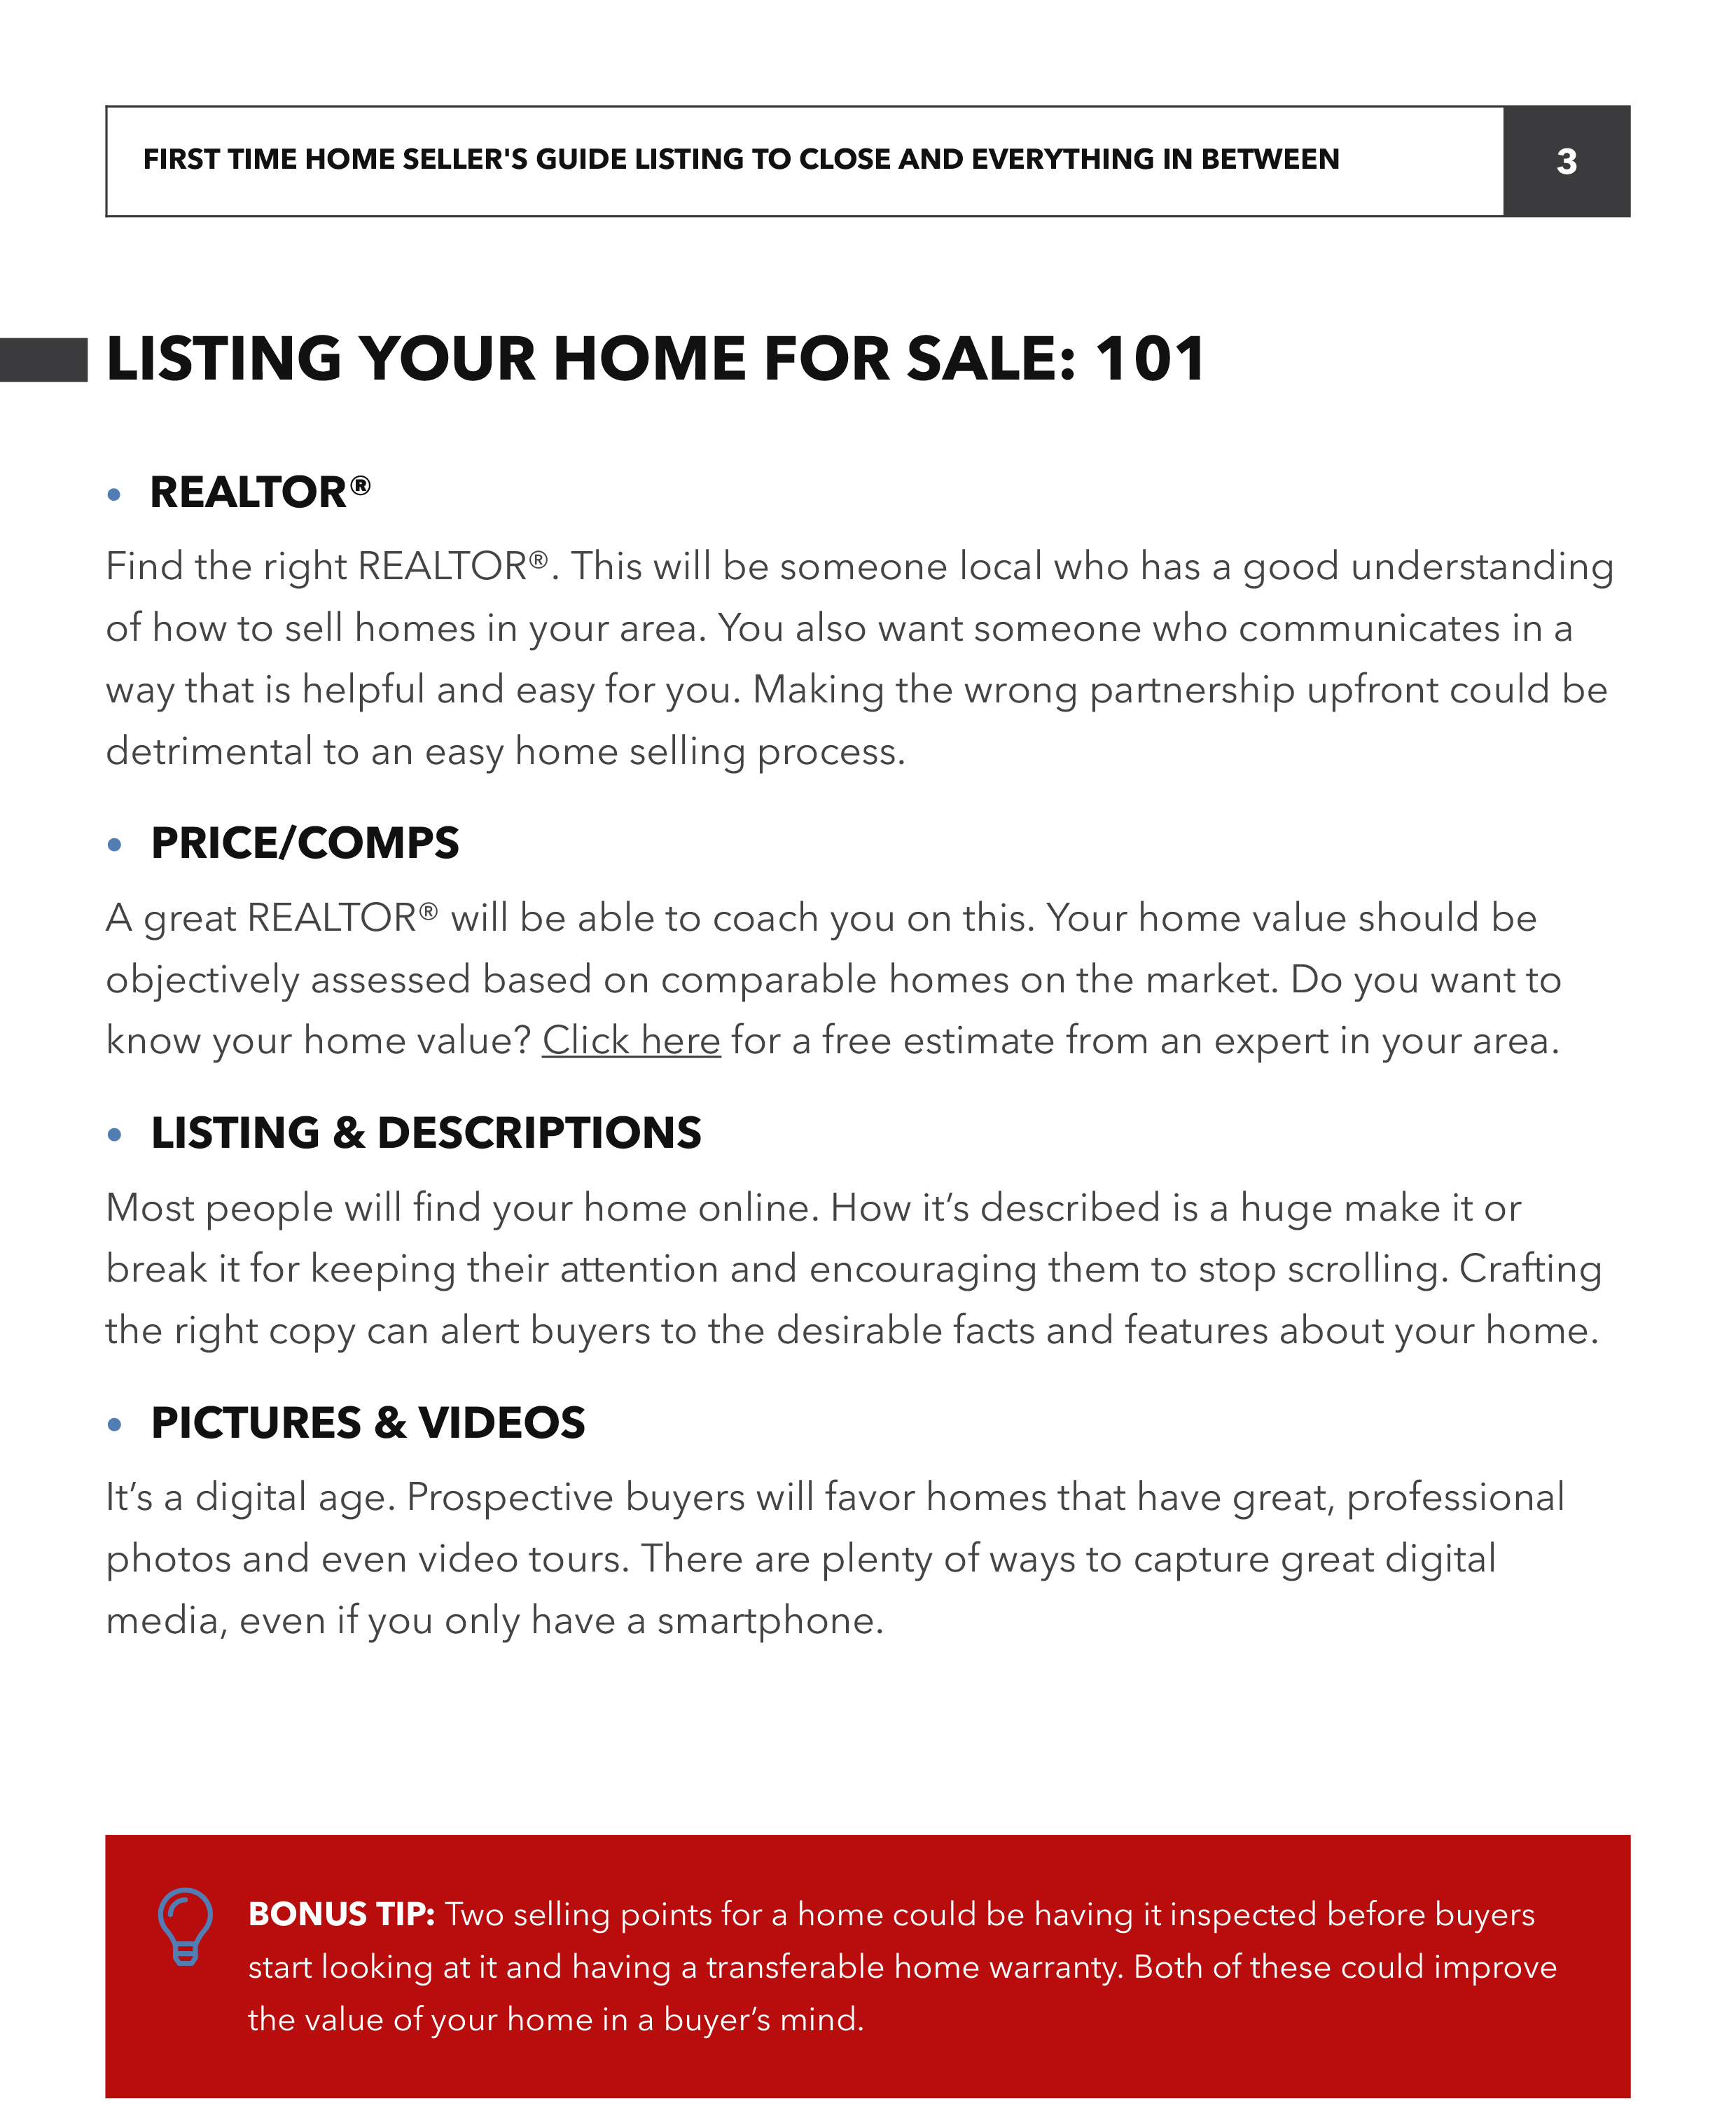 First Time Home Seller's Guide